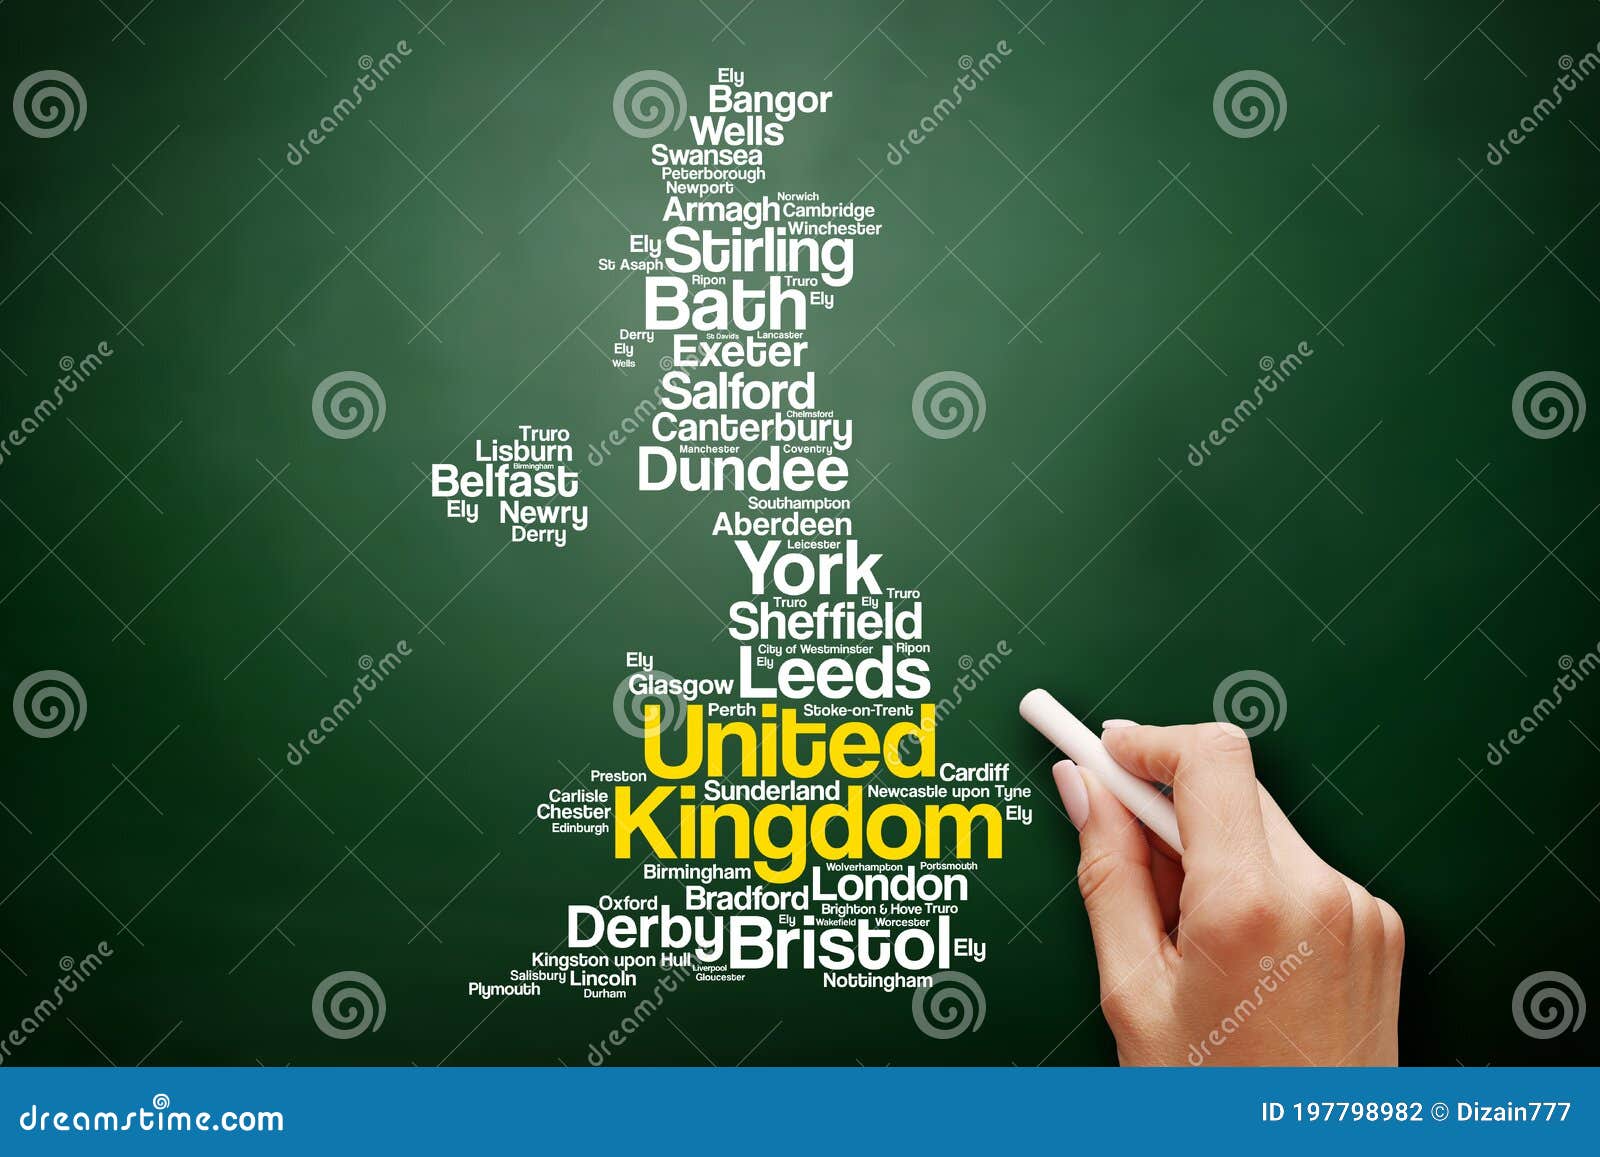 list of cities and towns in united kingdom, map word cloud collage, business and travel concept background